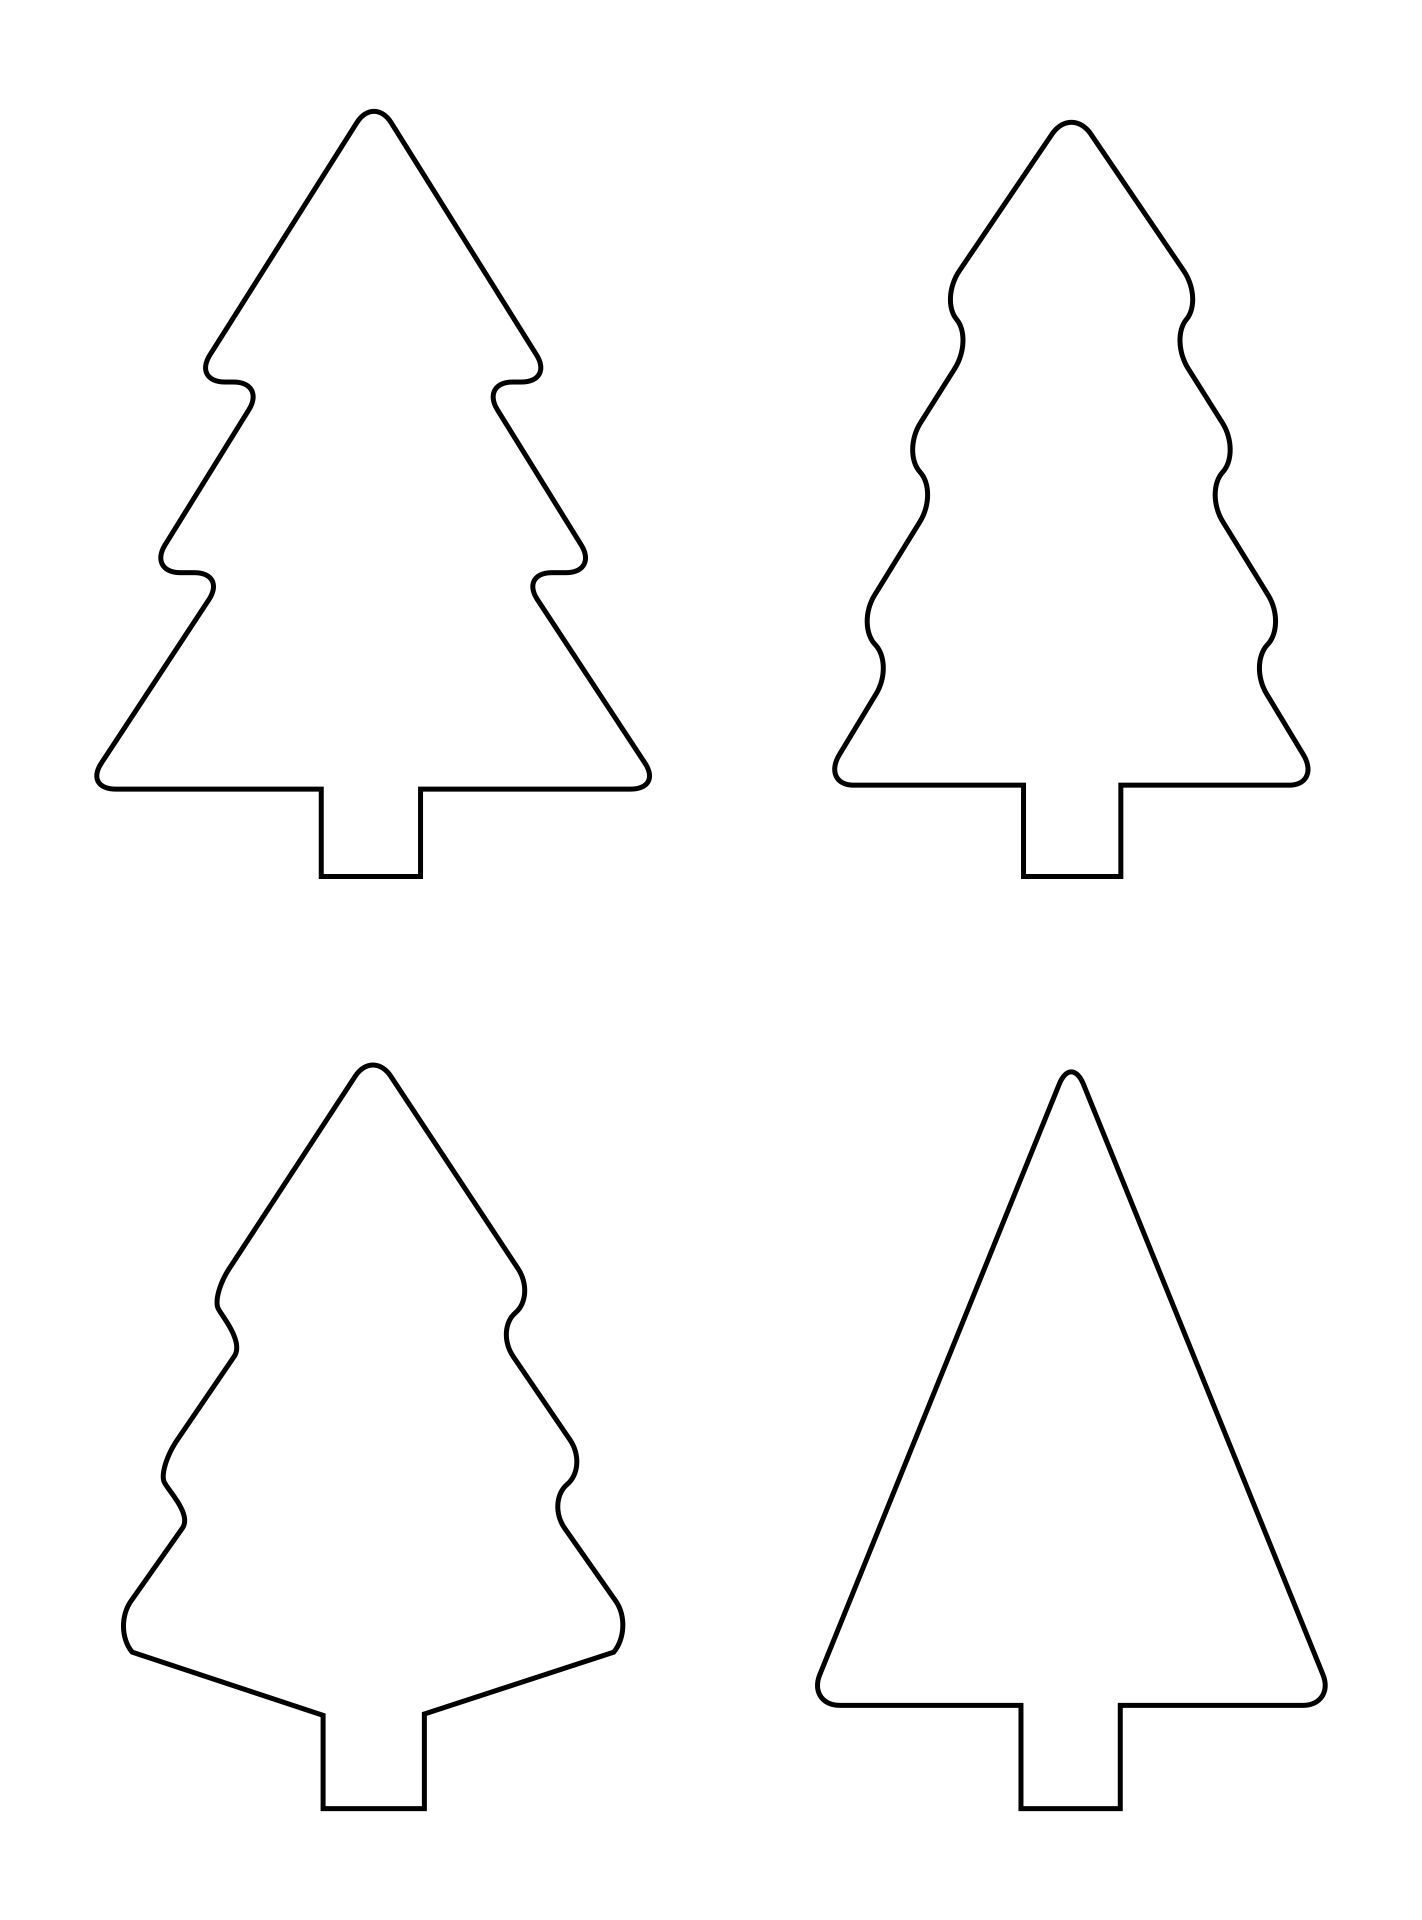 7 Best Images of Large Printable Christmas Tree Patterns Christmas